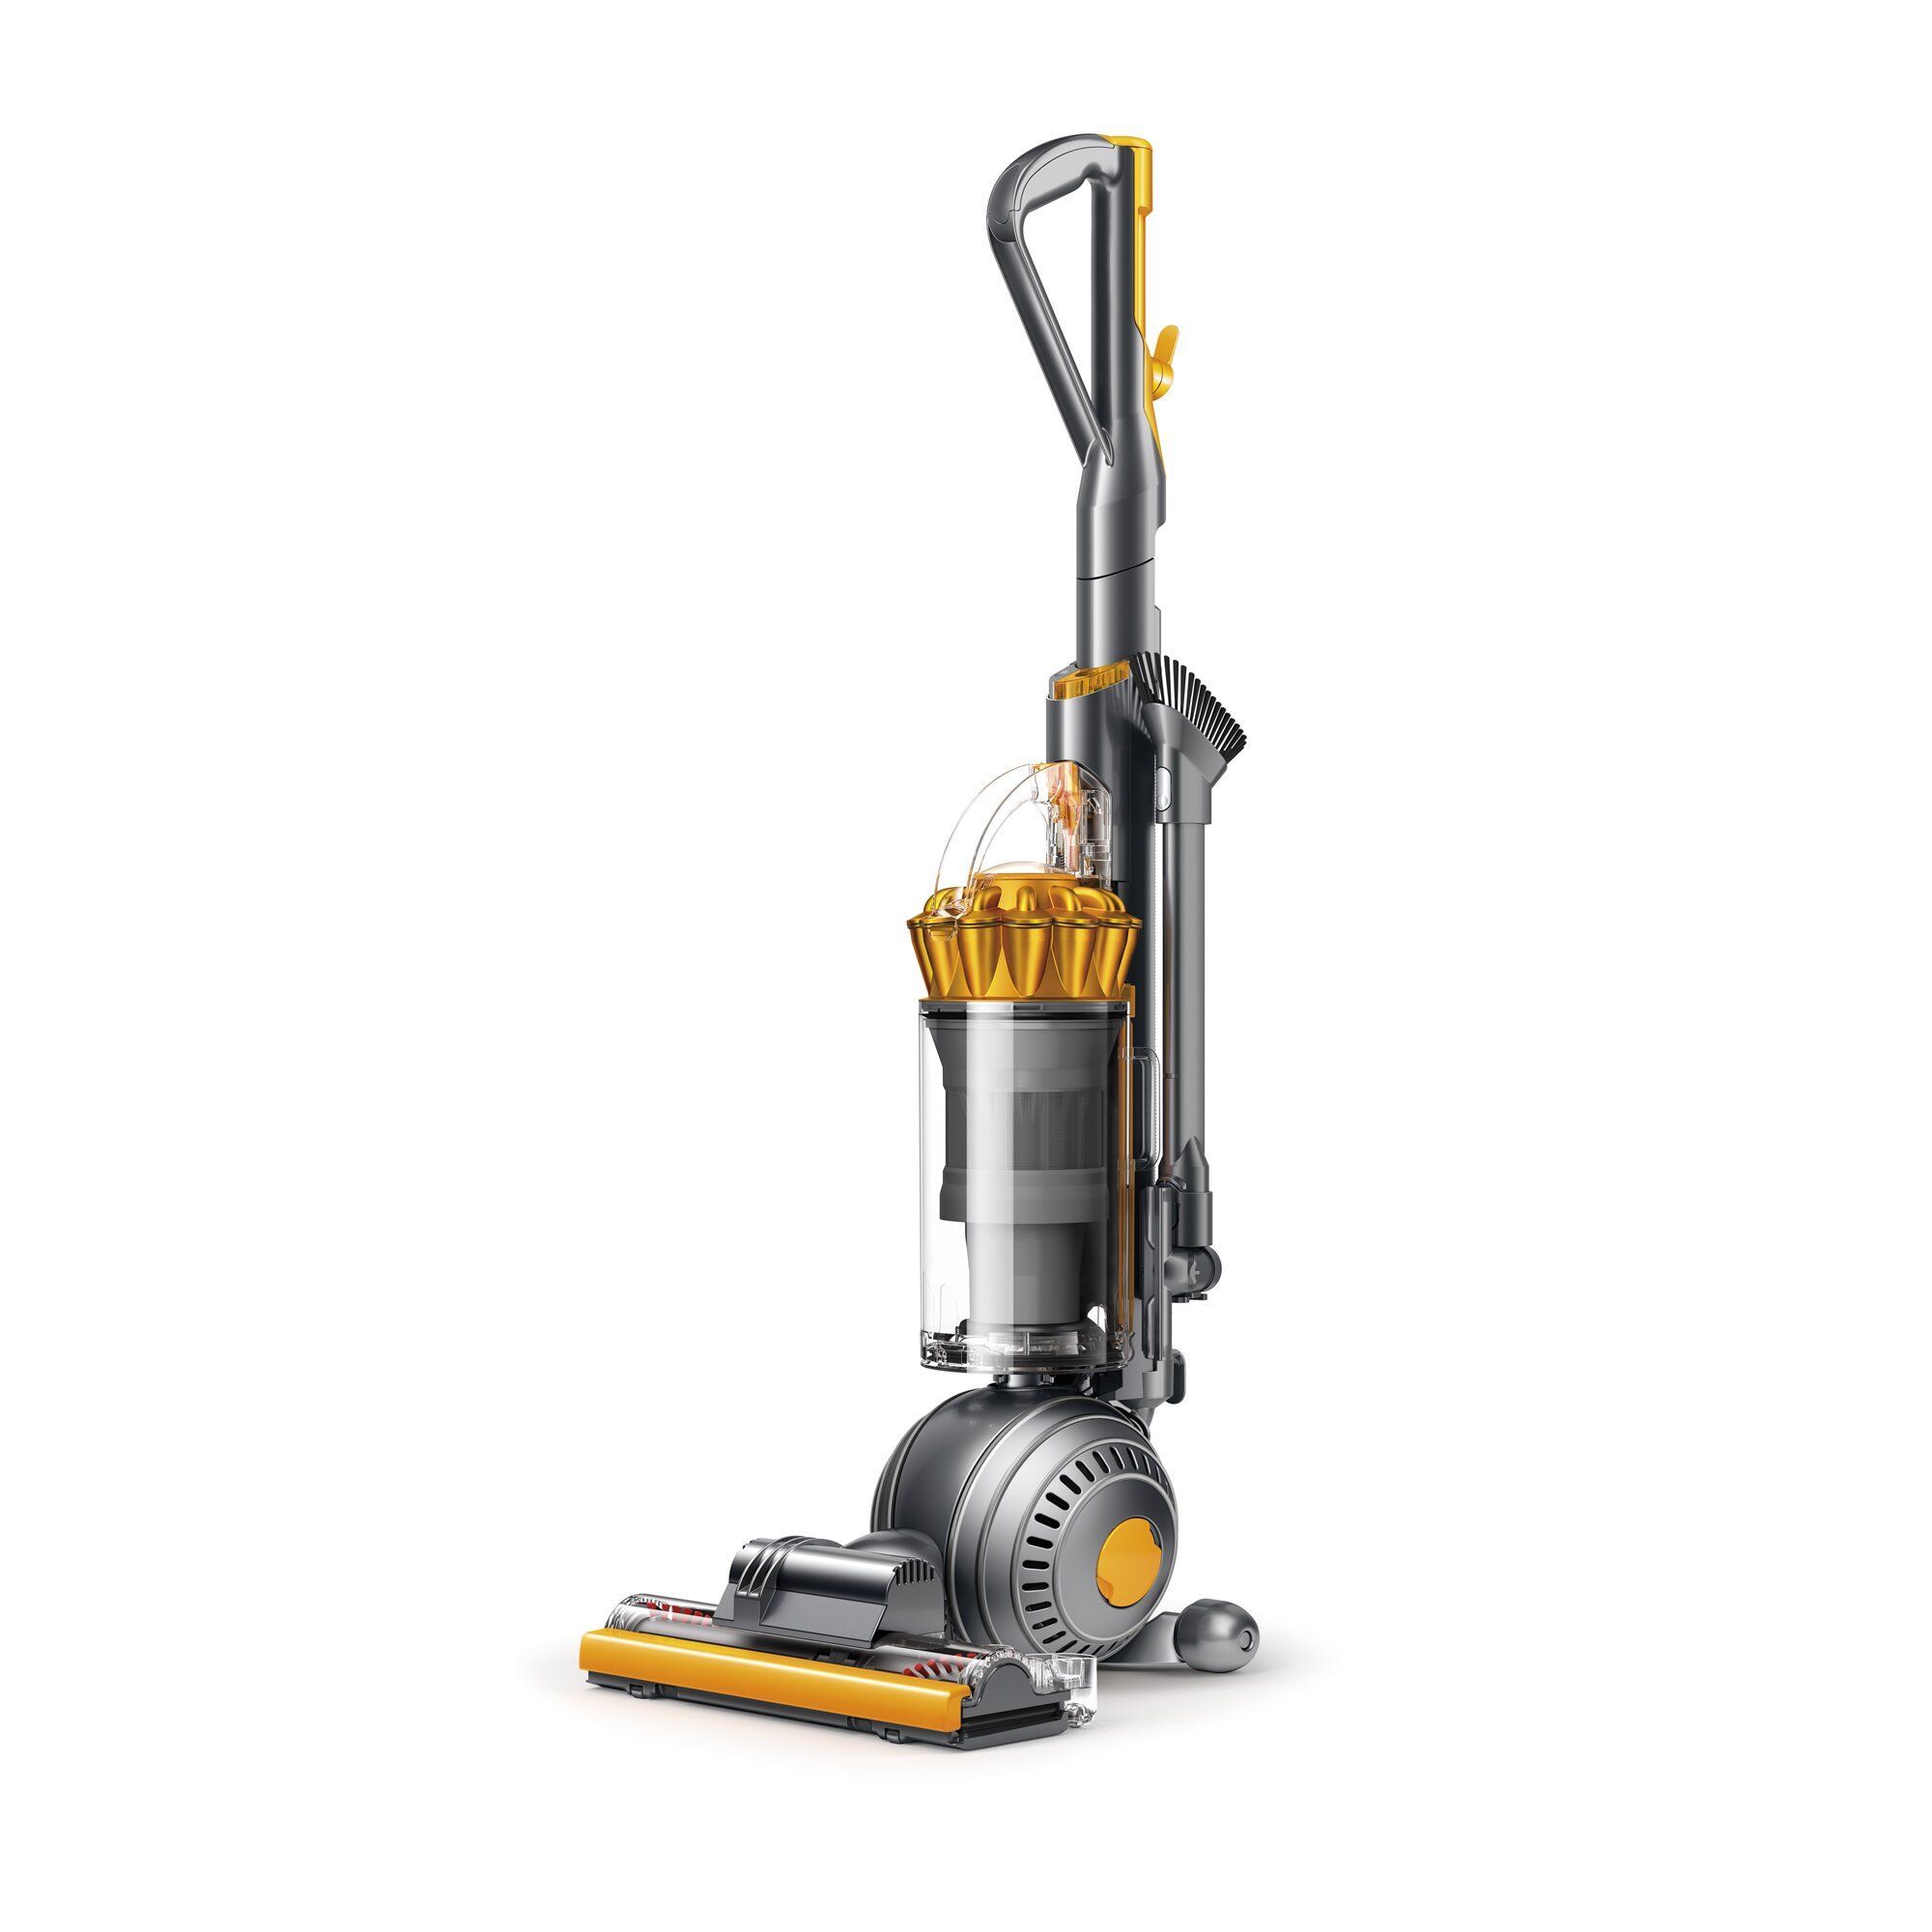 The Best 8 Dyson Vacuums In 2021, Best Dyson Attachment For Hardwood Floors